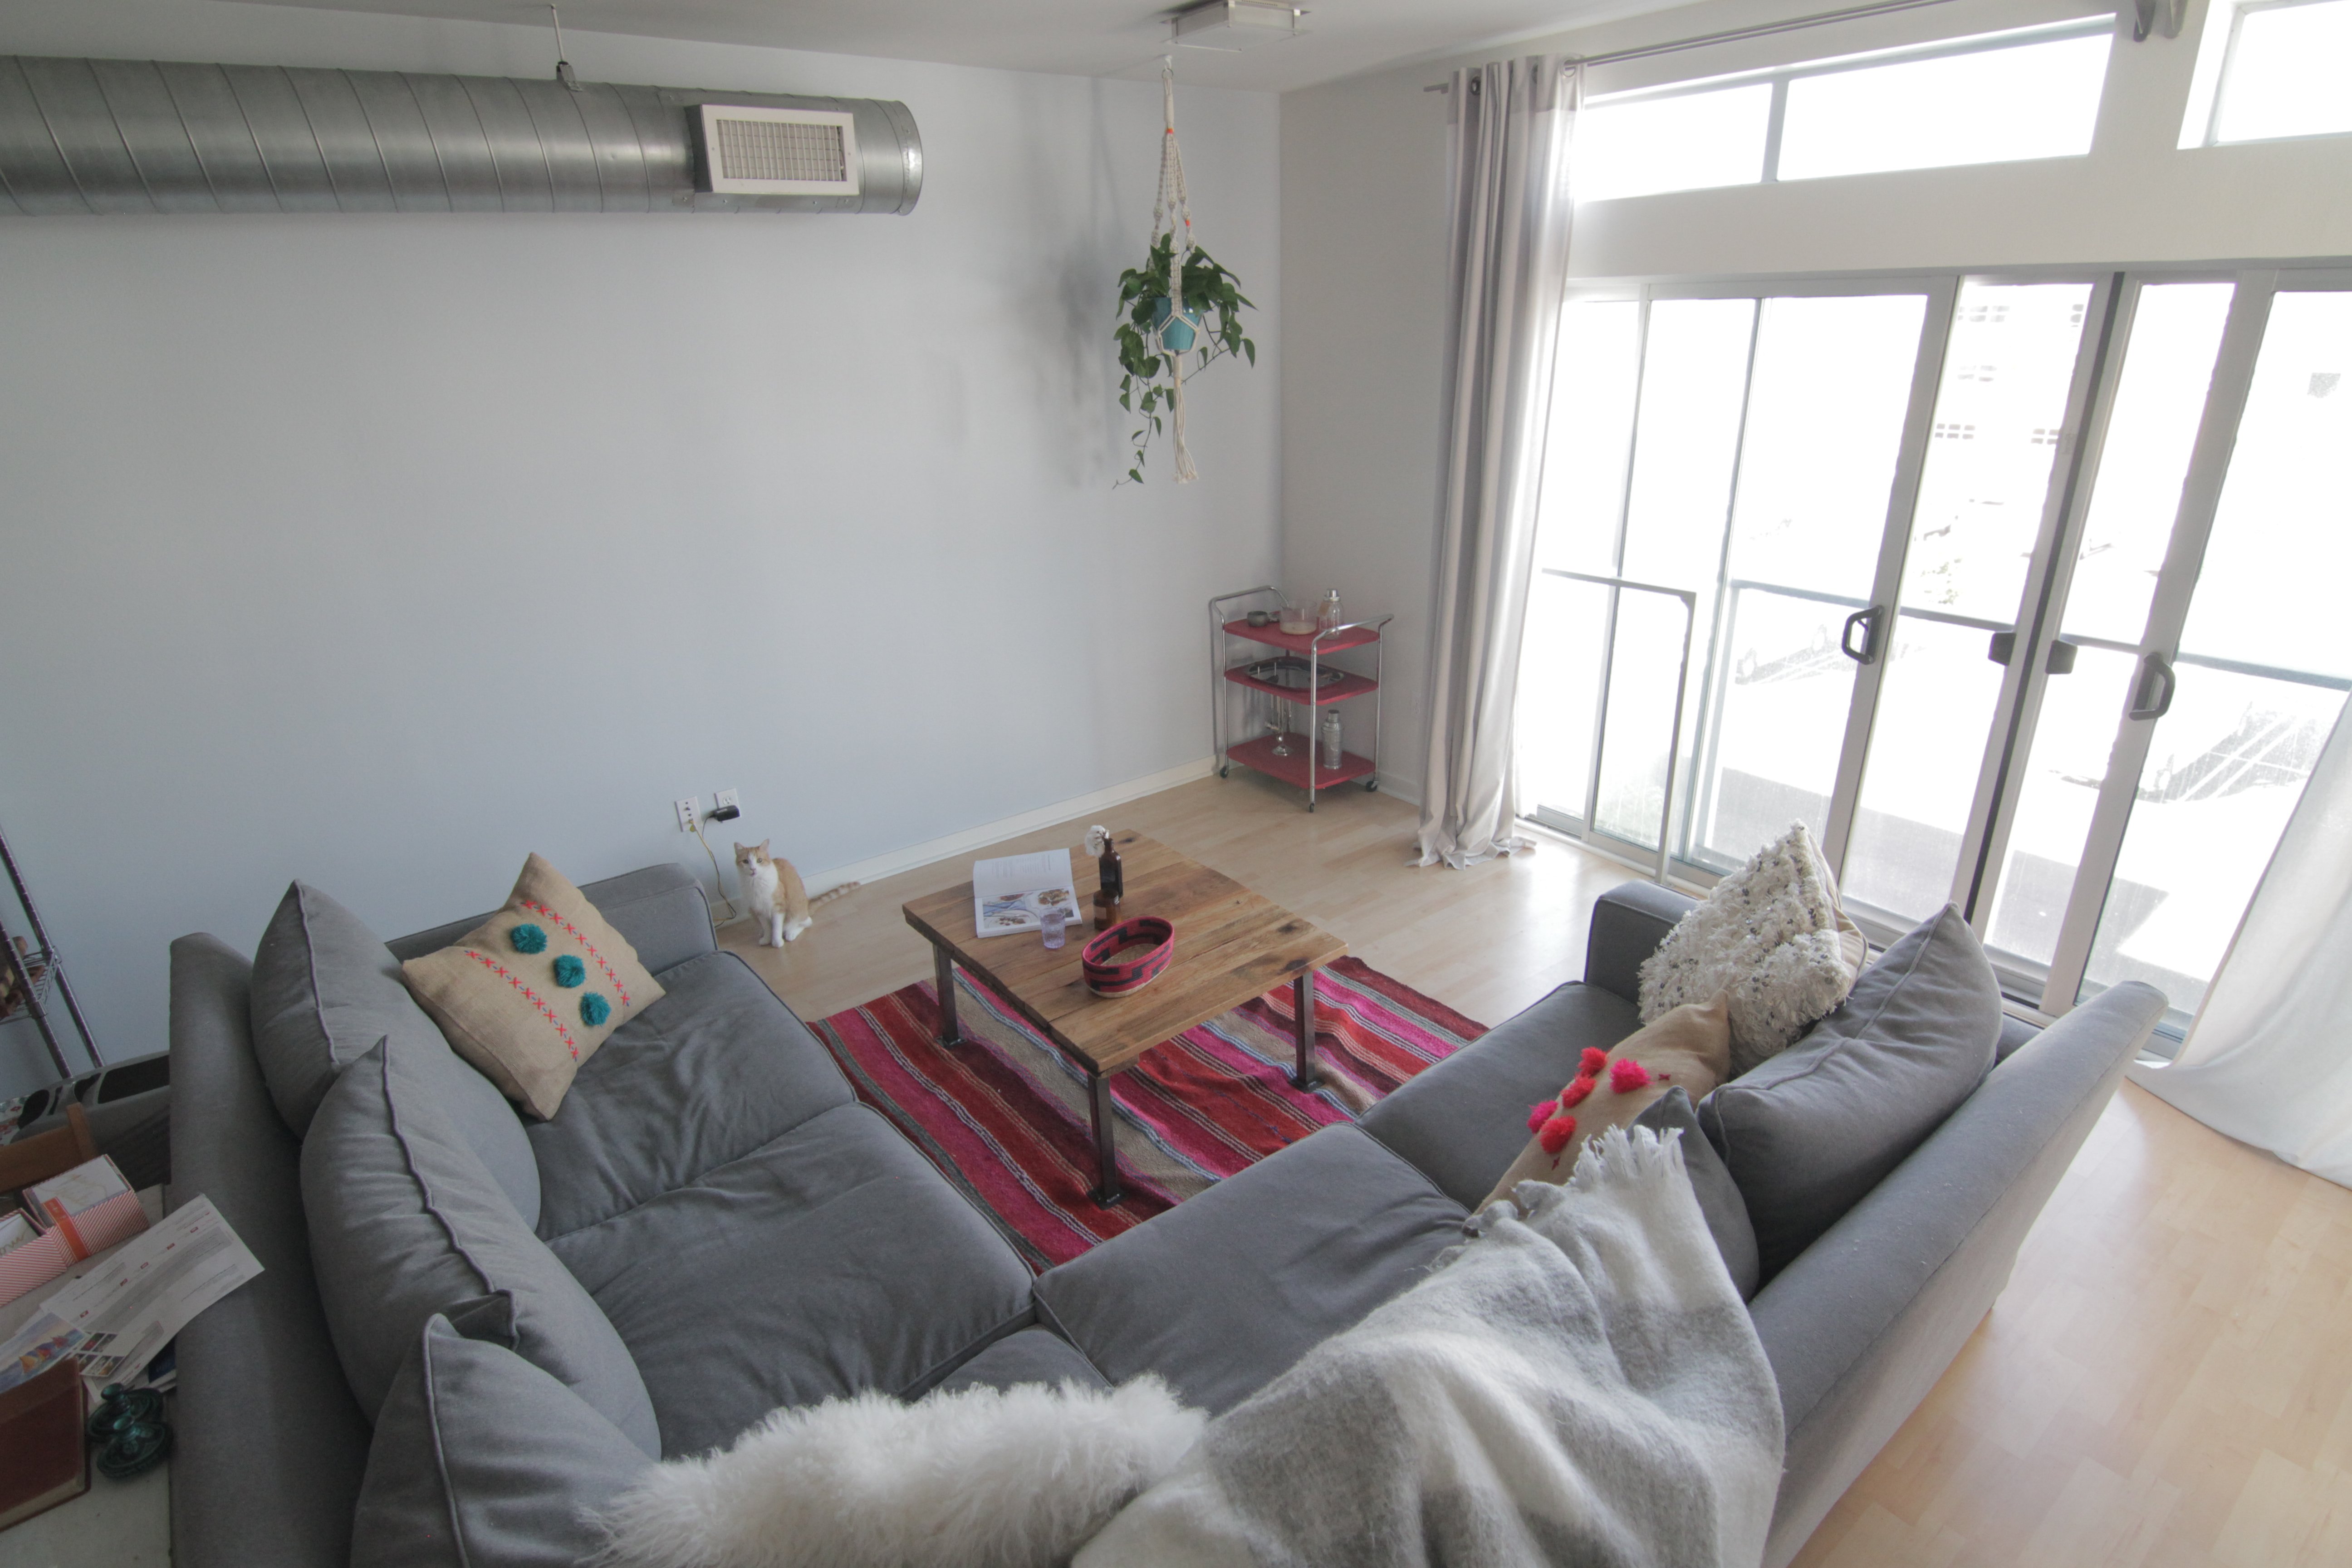 Tour Inside a 300-Square-Foot Brooklyn Apartment That Feels Bright and Airy